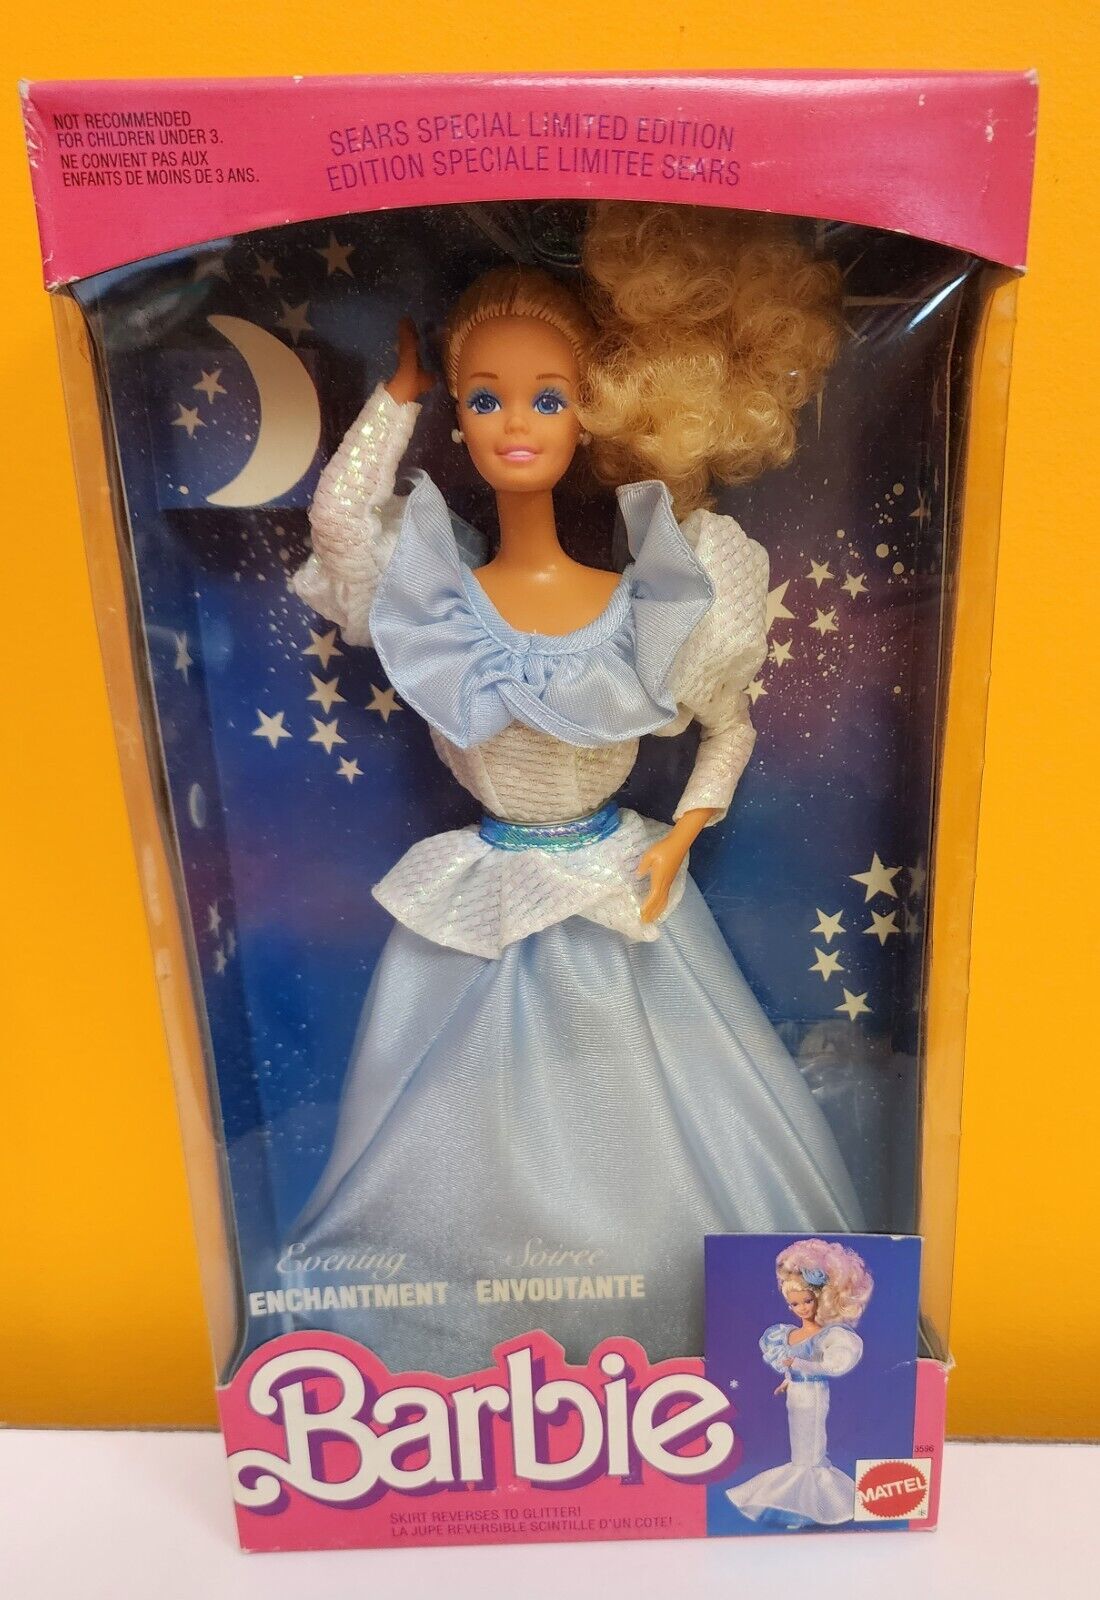 1989 MIB Barbie Evening Enchantment- Sears Special Limited Edition #3596